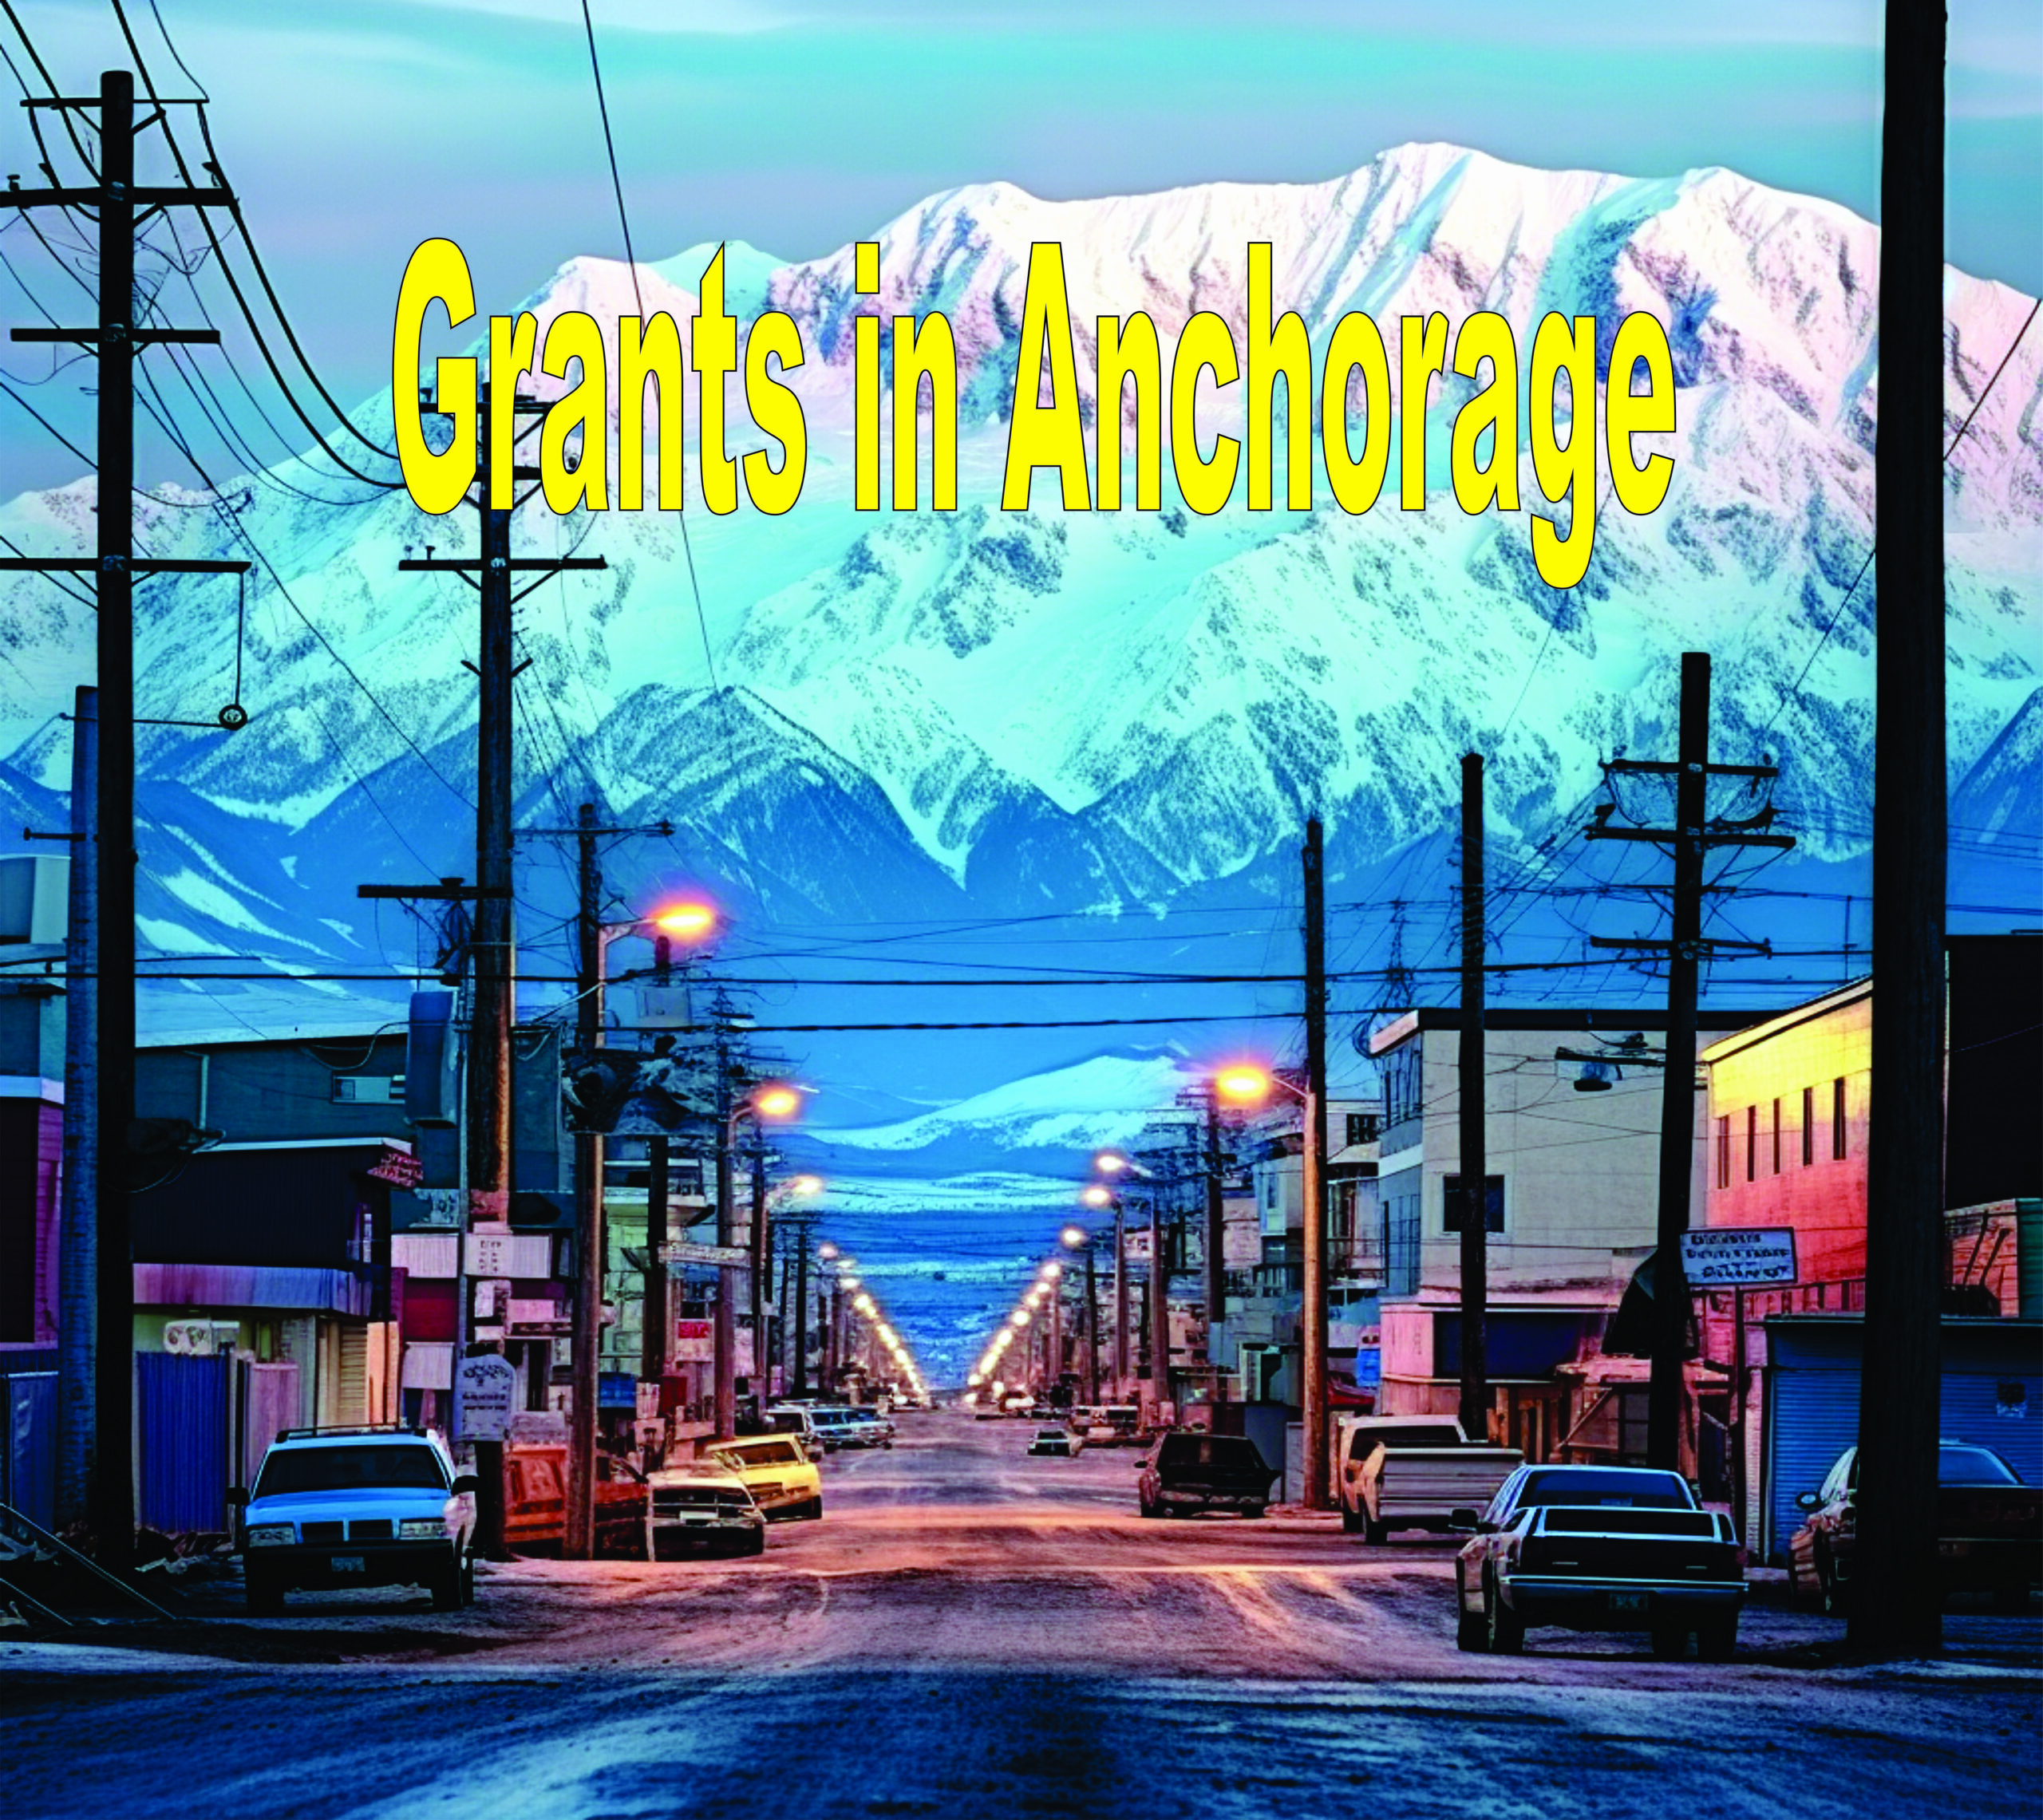 Grants In Anchorage